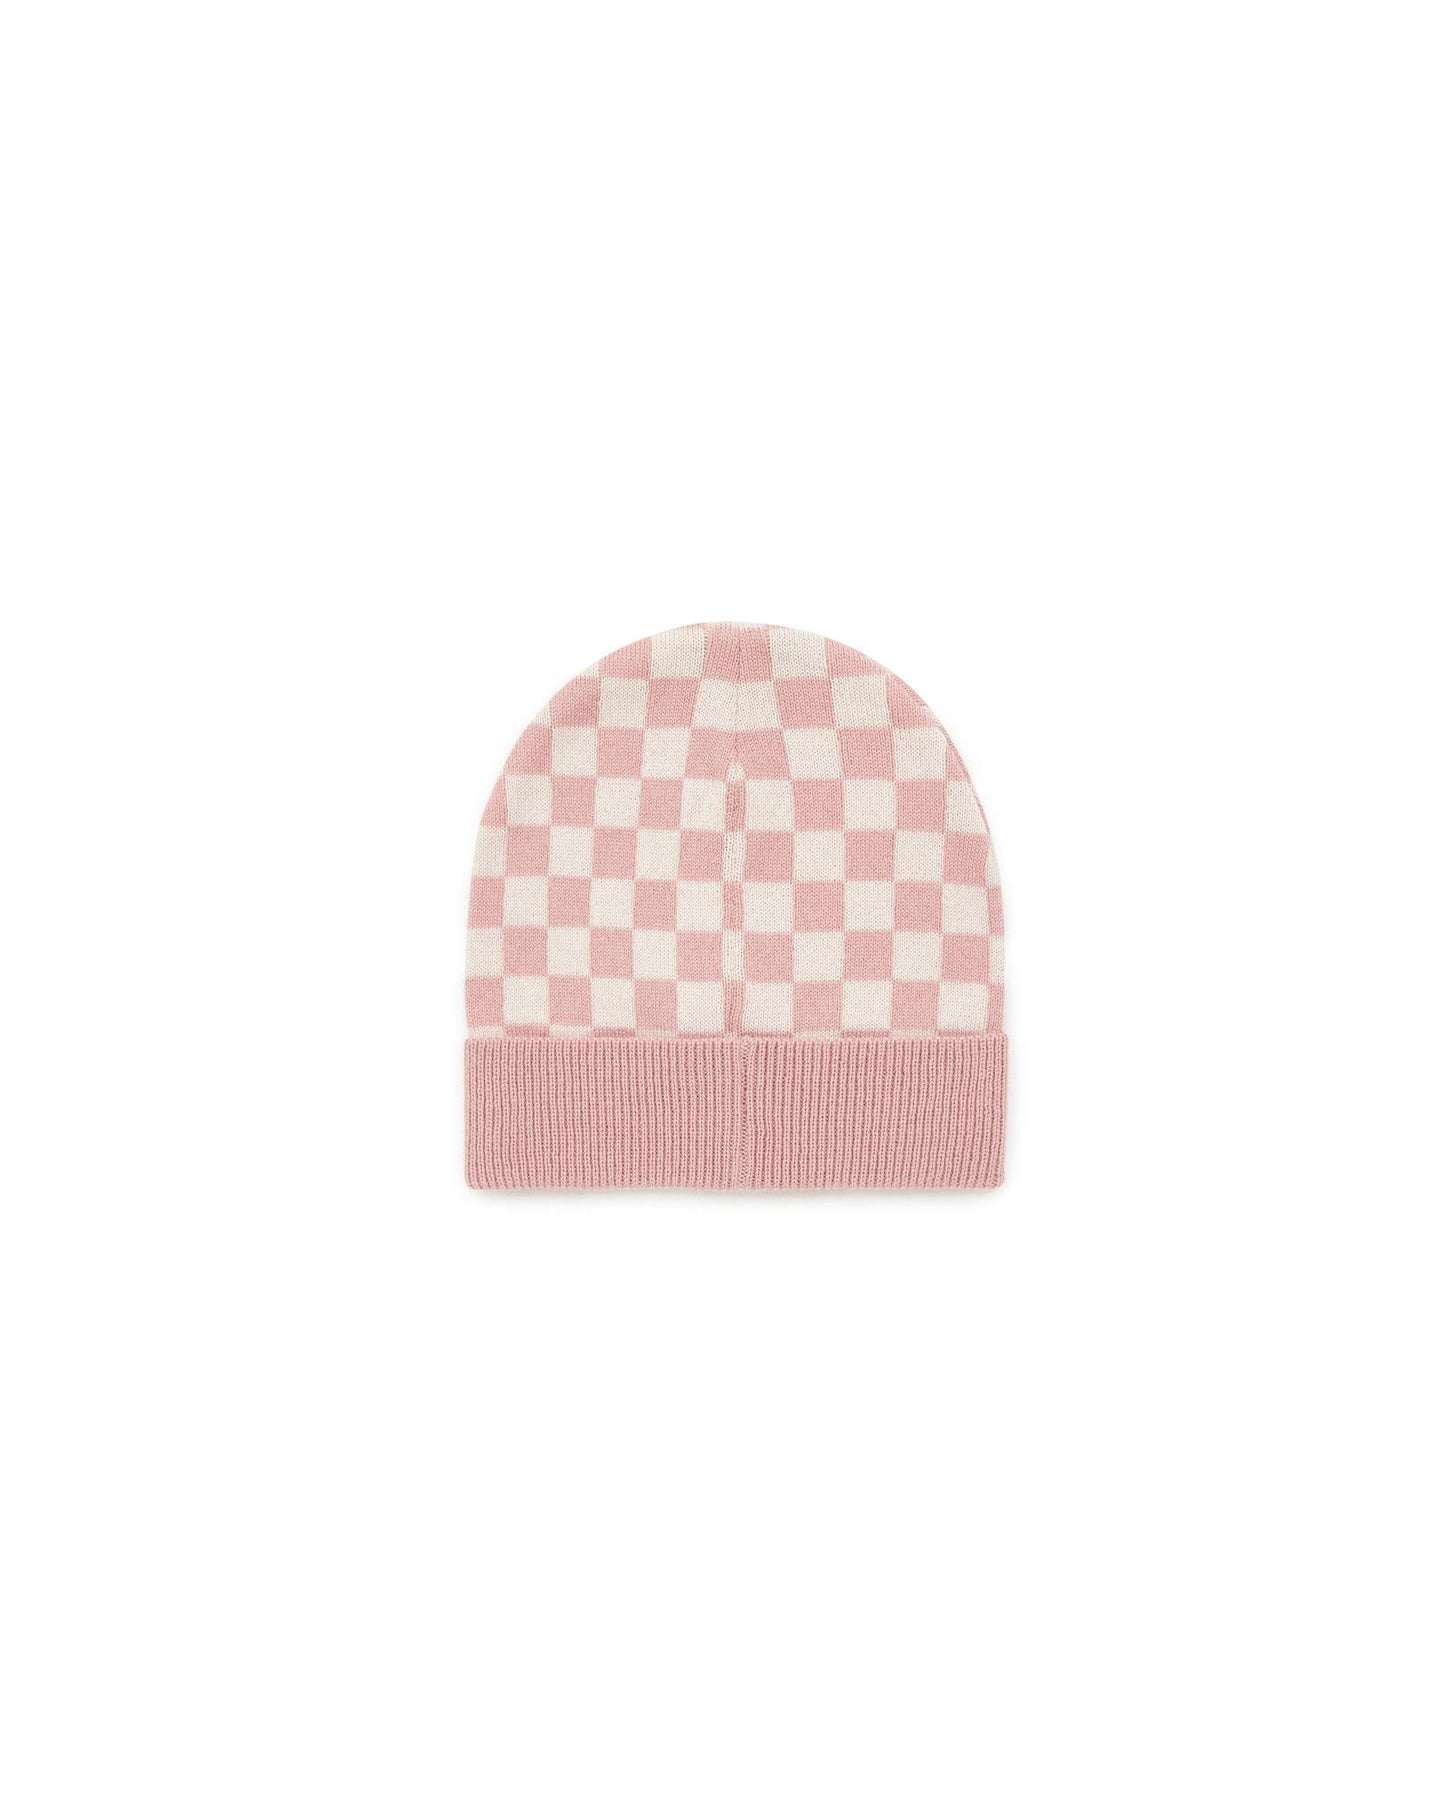 Beanie checkerboard Pink in jacquard knitting